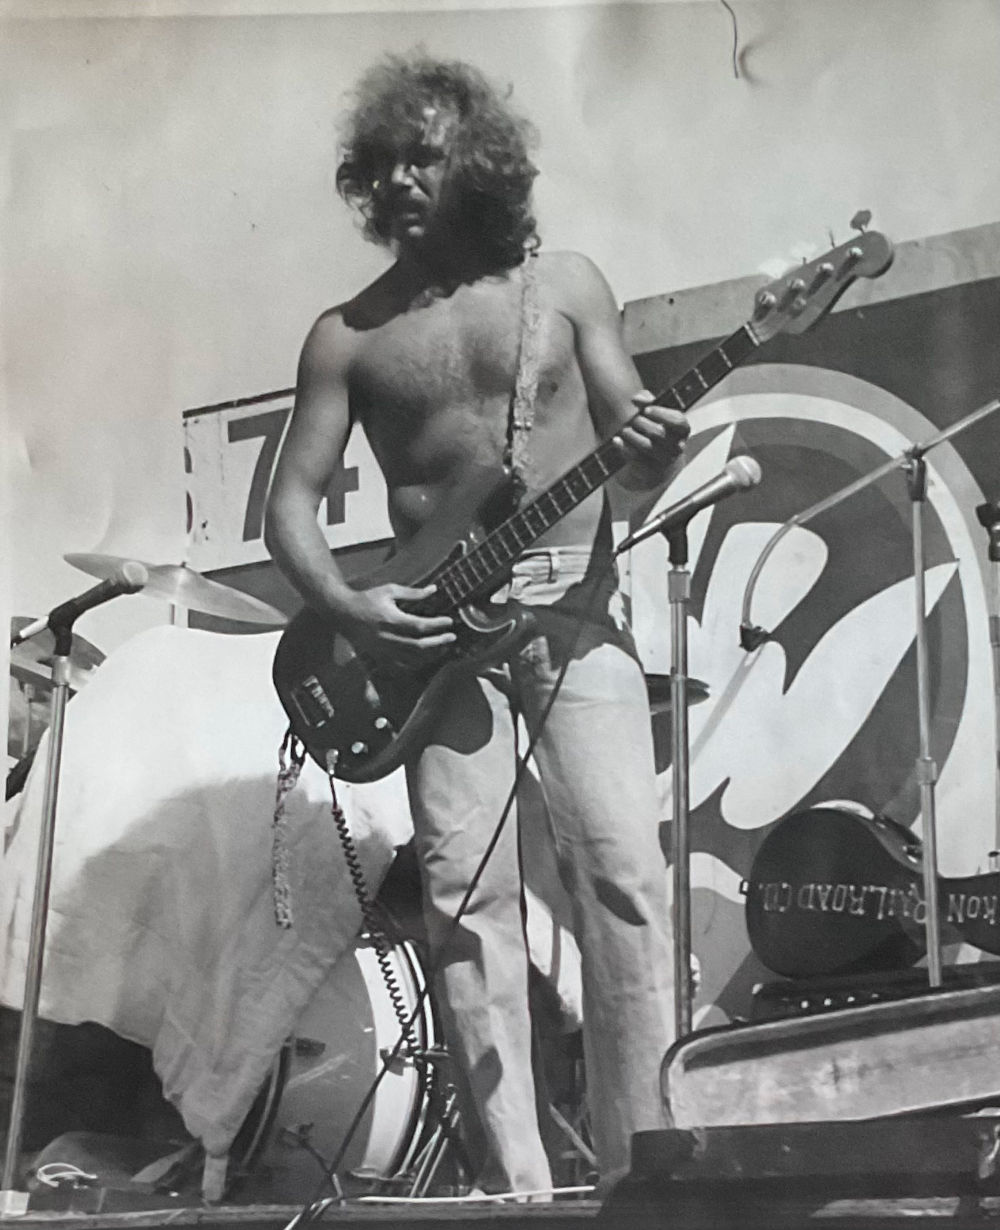 Joe playing bass in his younger years